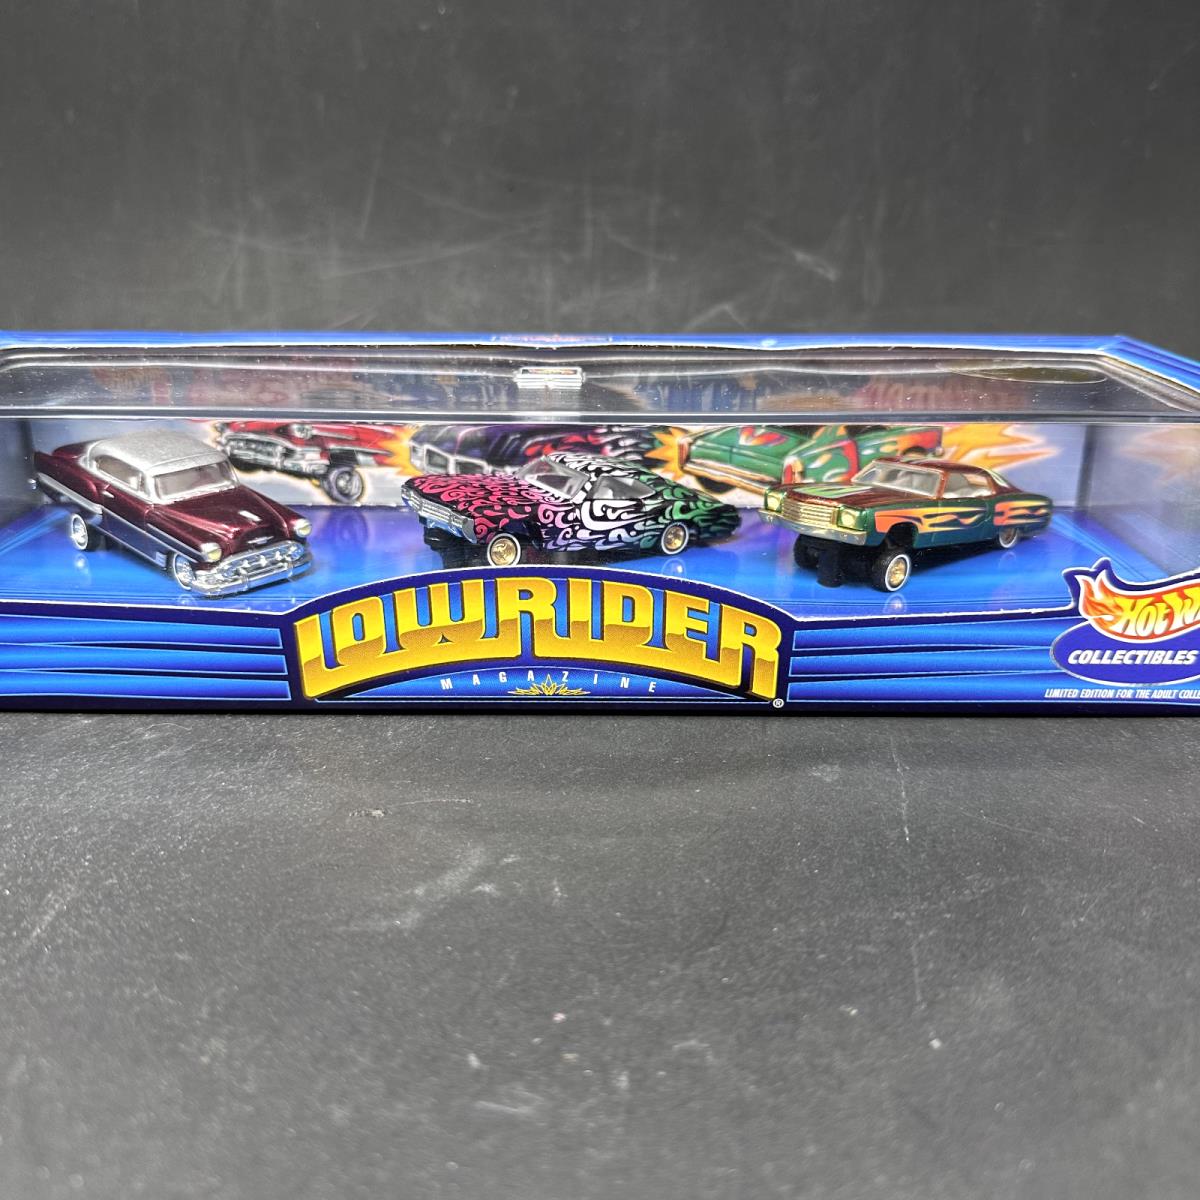 Hot Wheels Collectibles Lowrider Magazine Die Cast 4-Pack Cars 1:64 B236 - Nisb